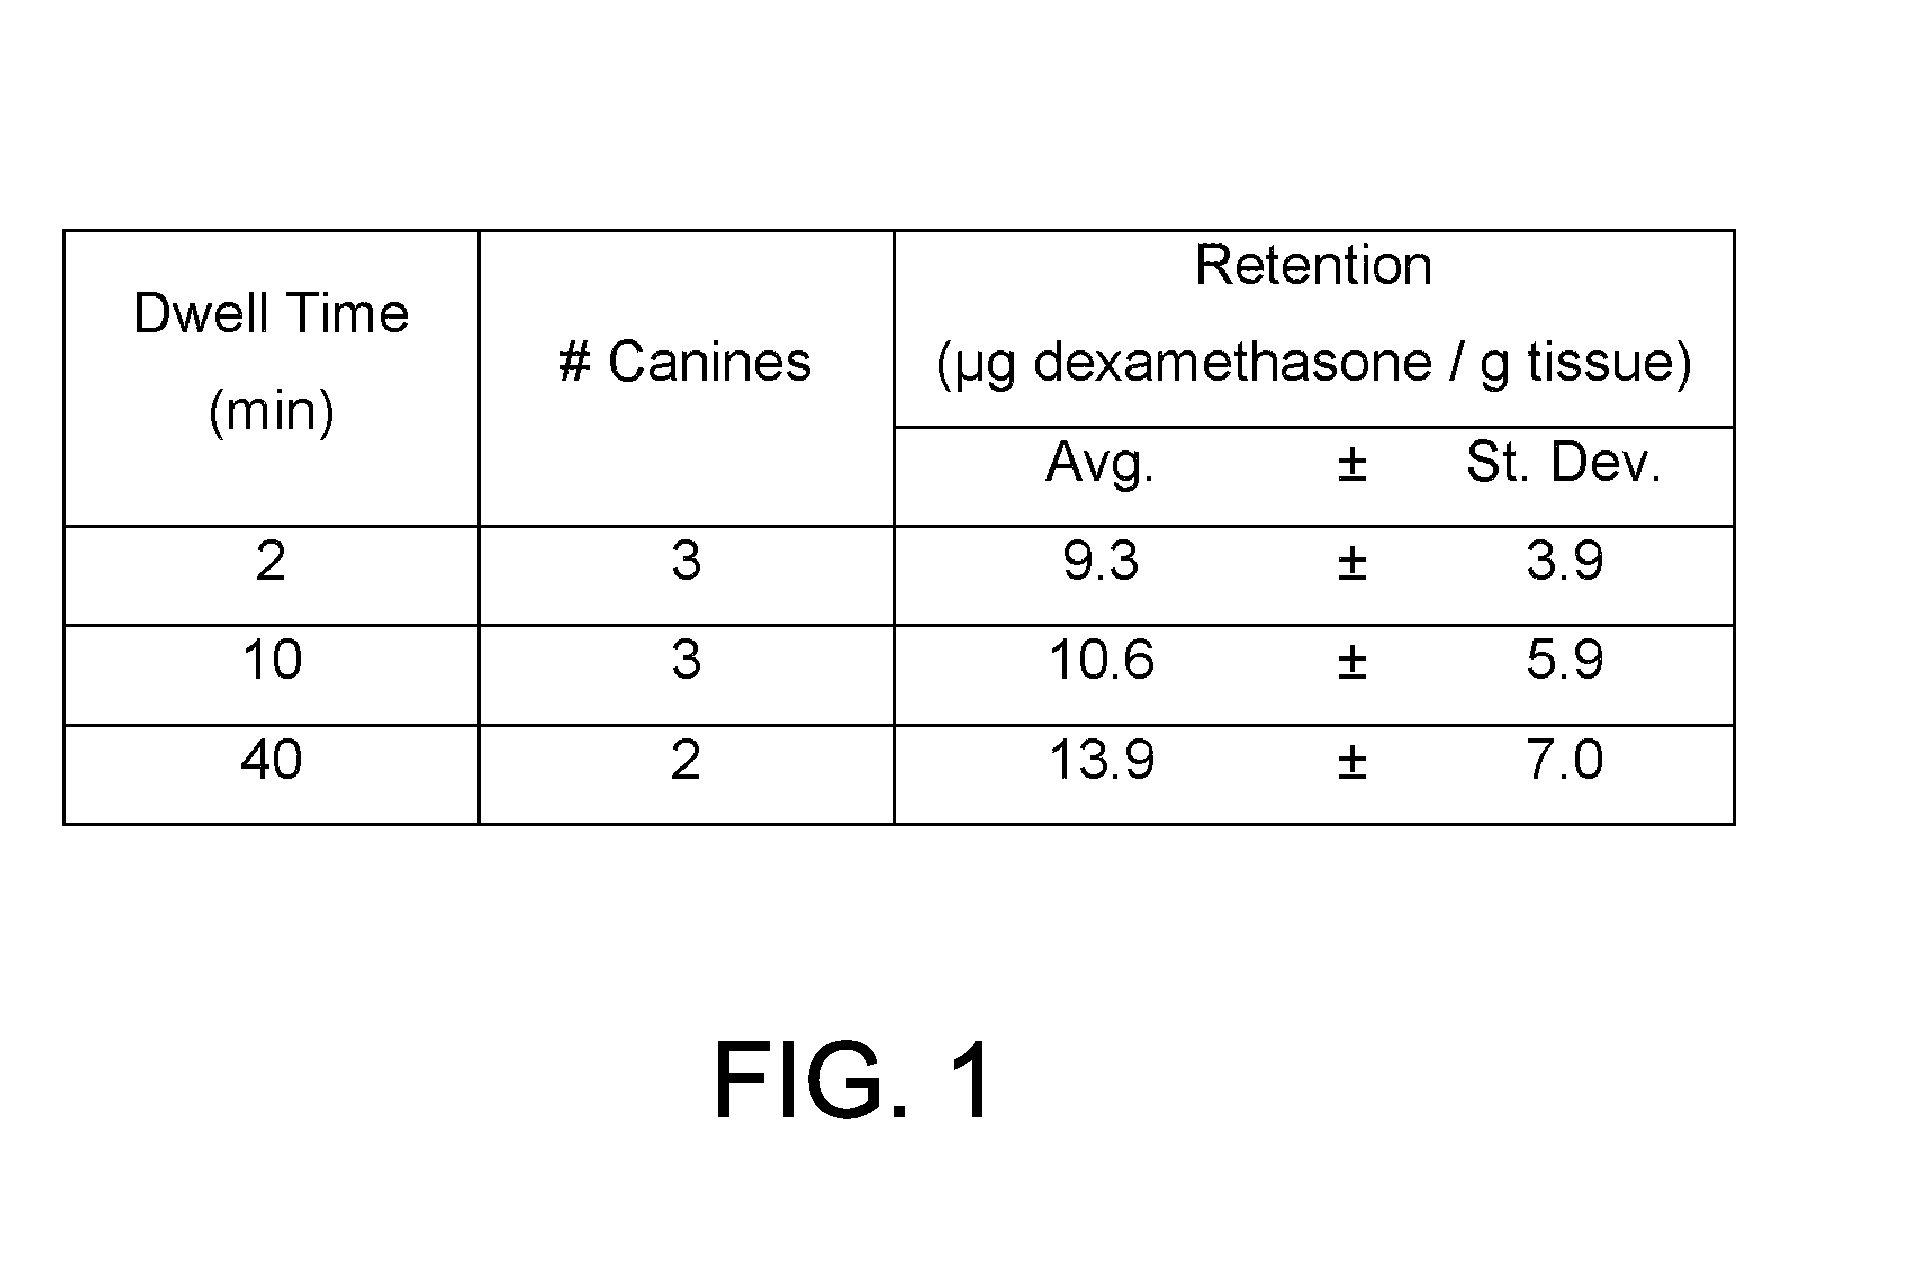 Articles and methods of treating vascular conditions